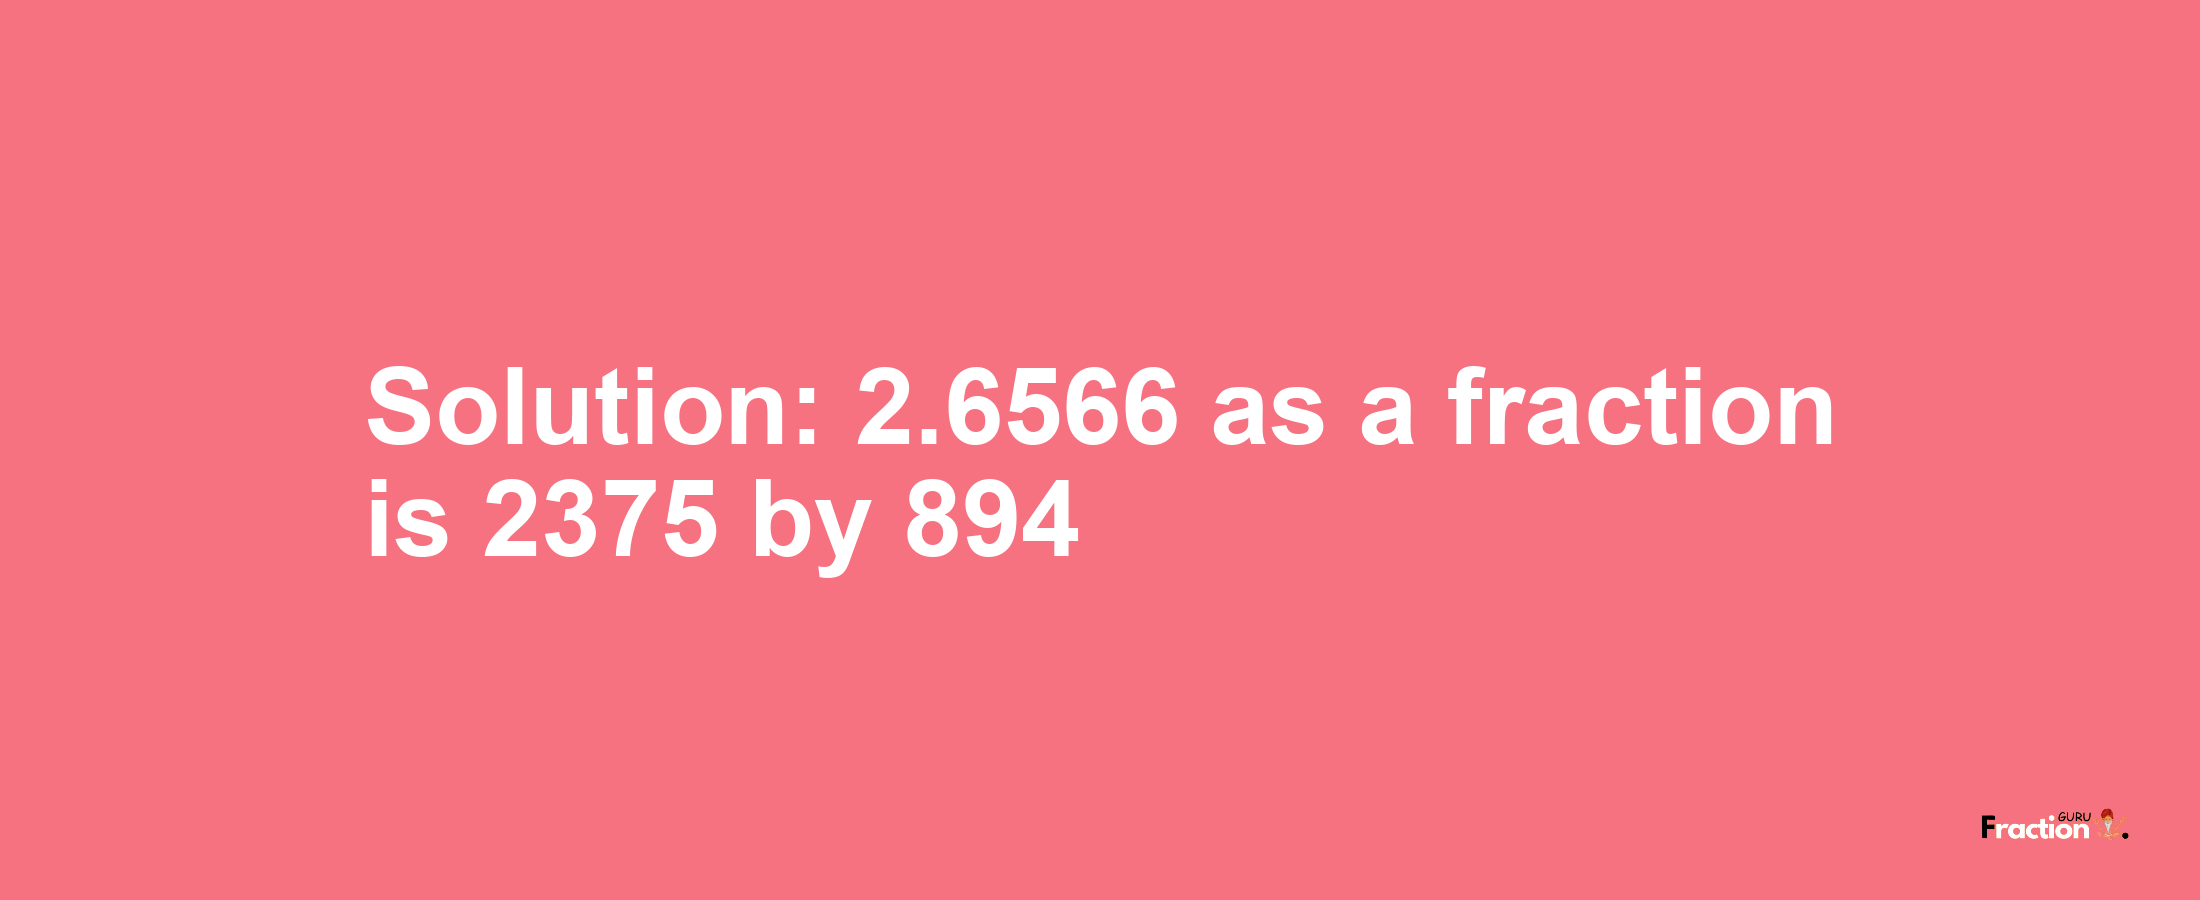 Solution:2.6566 as a fraction is 2375/894